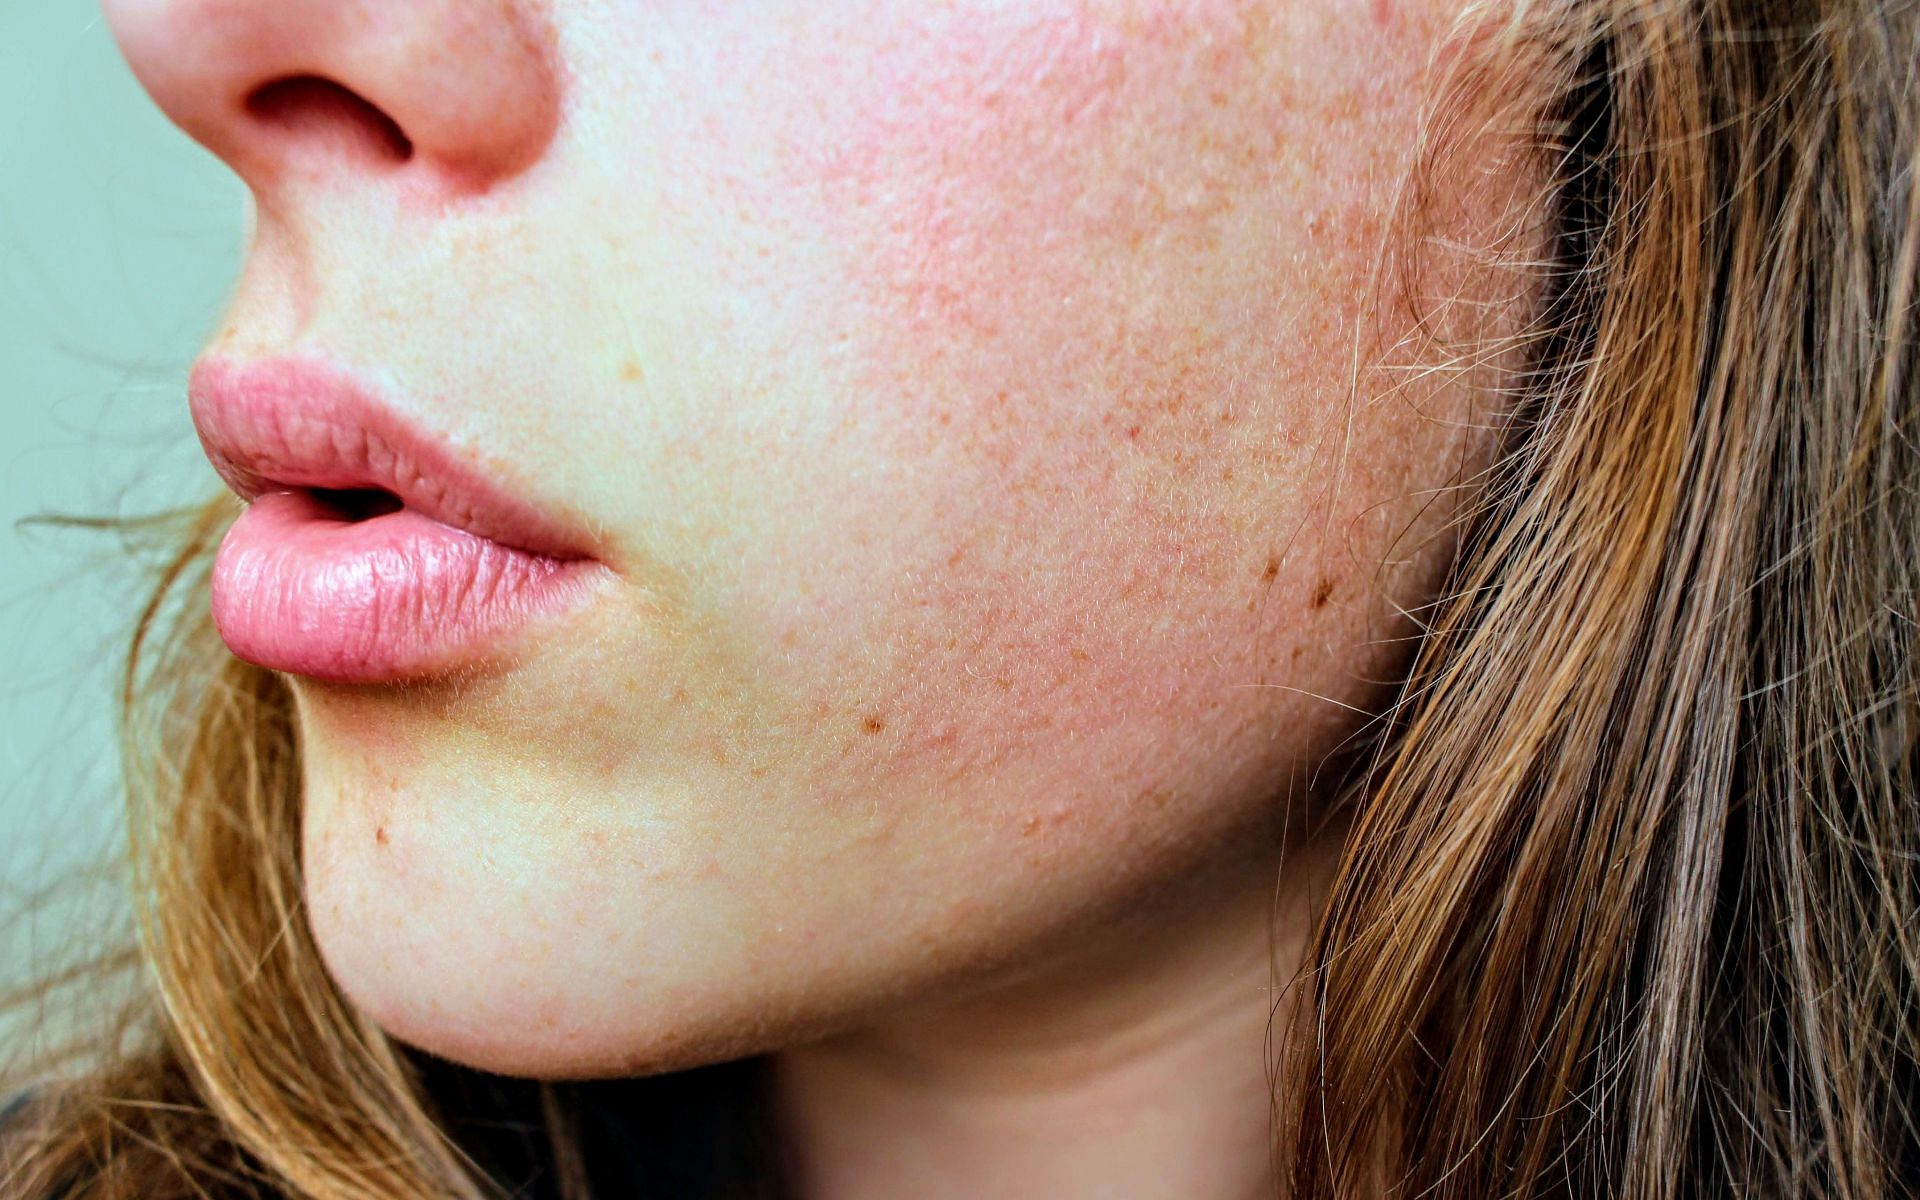 Importance of tomatoes for skin (image sourced via Pexels / Photo by jenna)